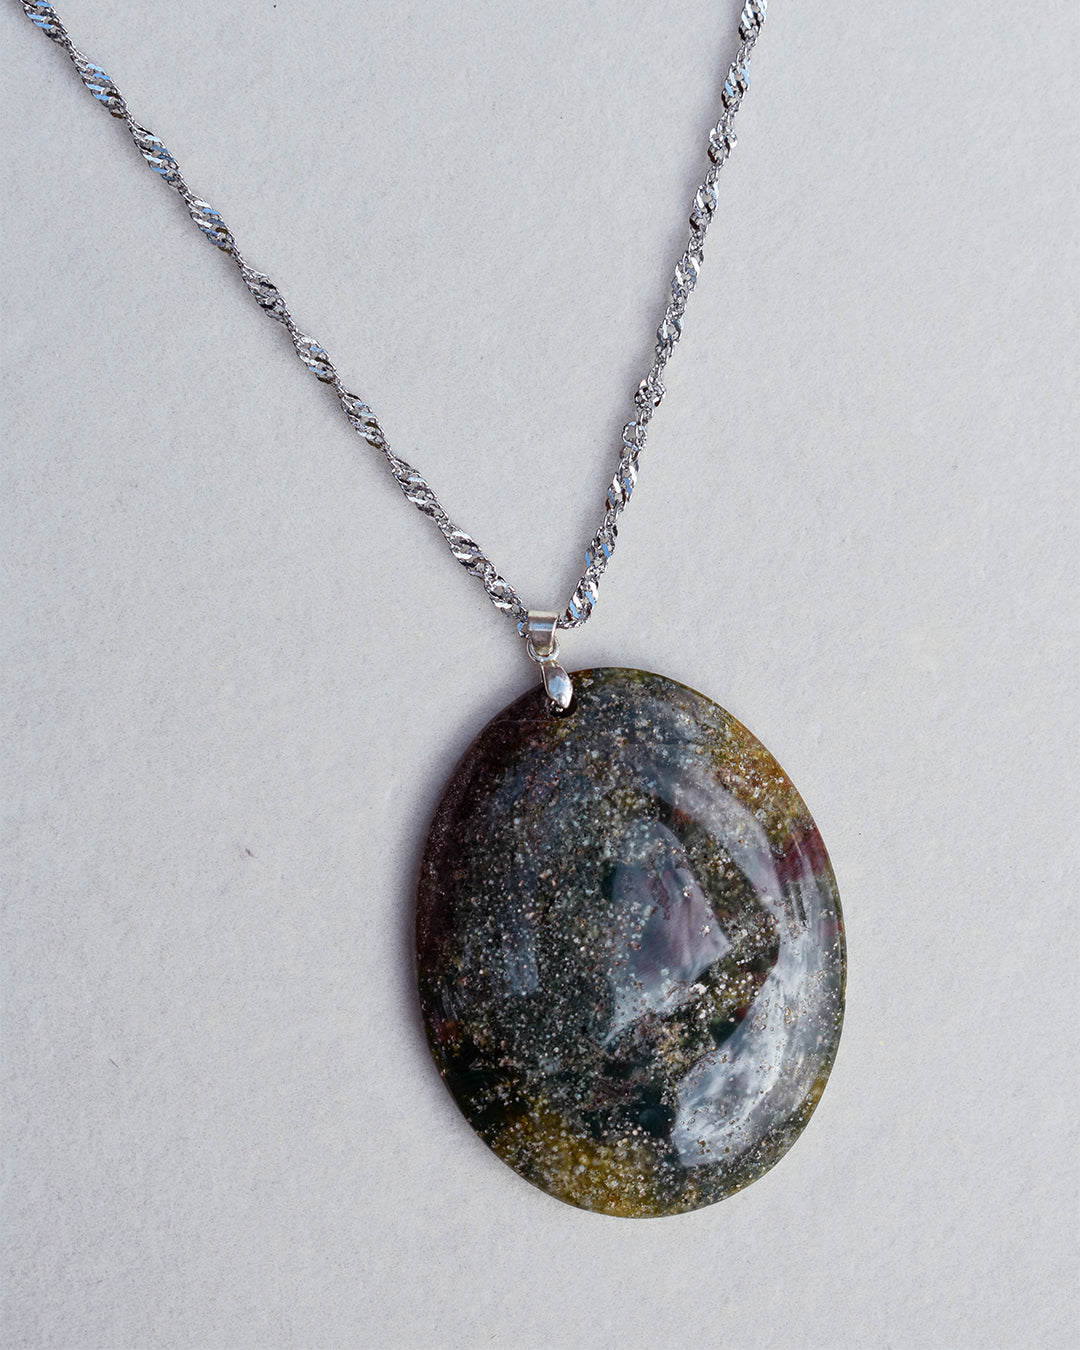 Stainless Steel chain with Jasper pendant